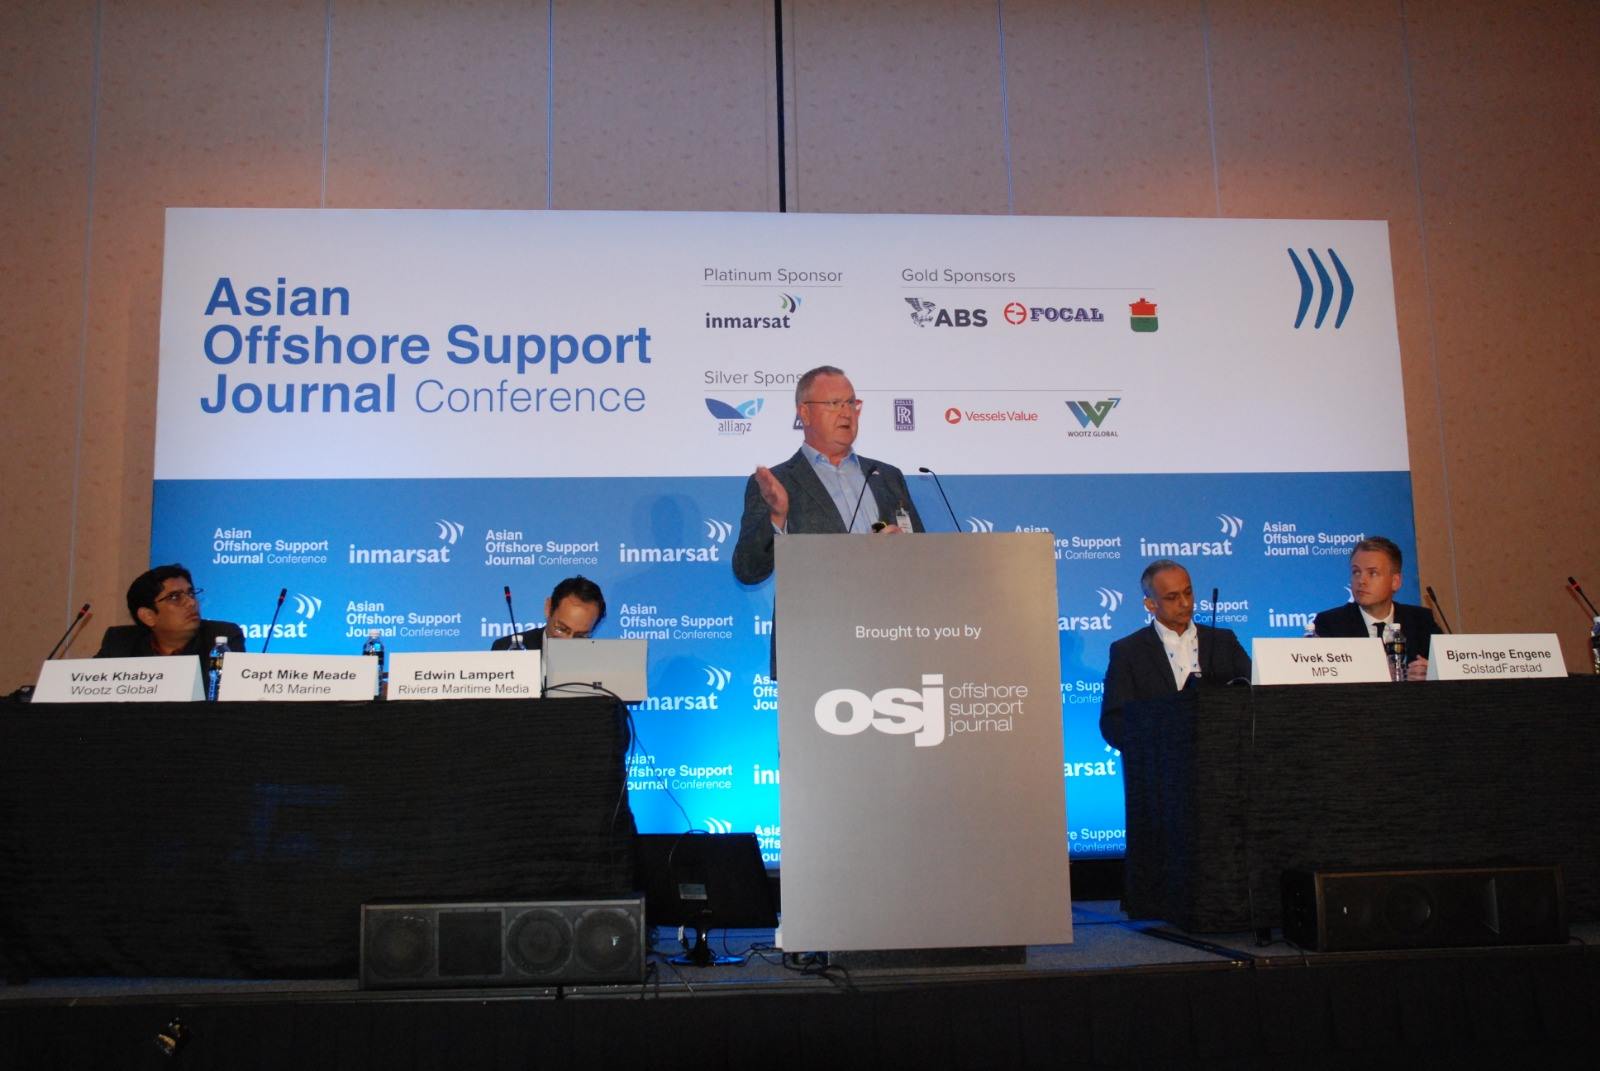 Asian Offshore Support Journal Conference 2018